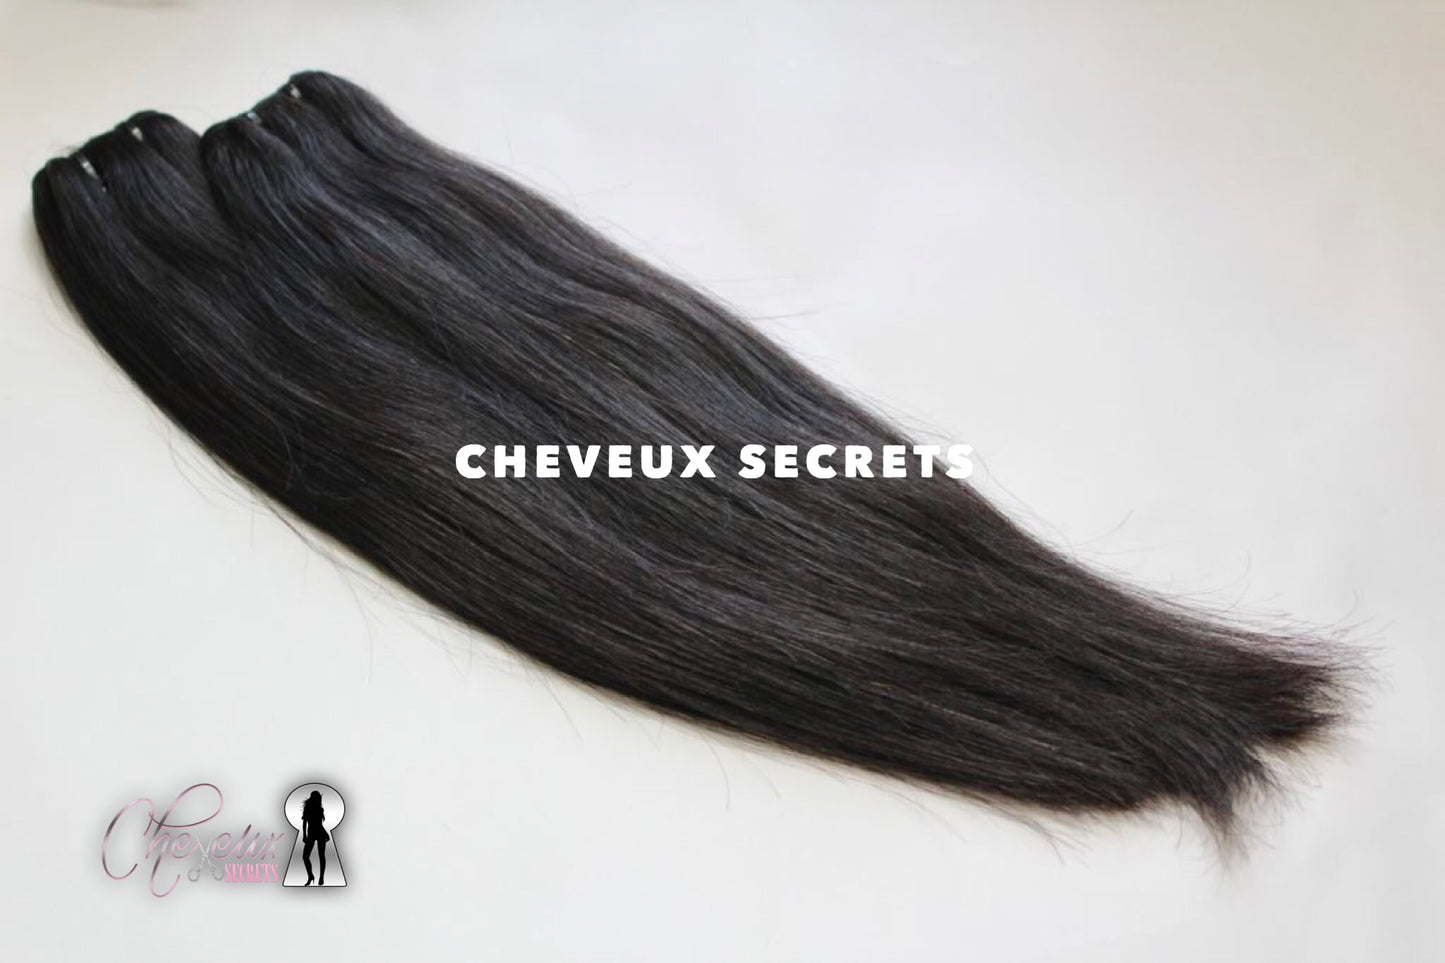 Our Raw Cambodian hair is the only trusted major company that supplies 100% Purest Quality  raw Cambodian hair over the years.